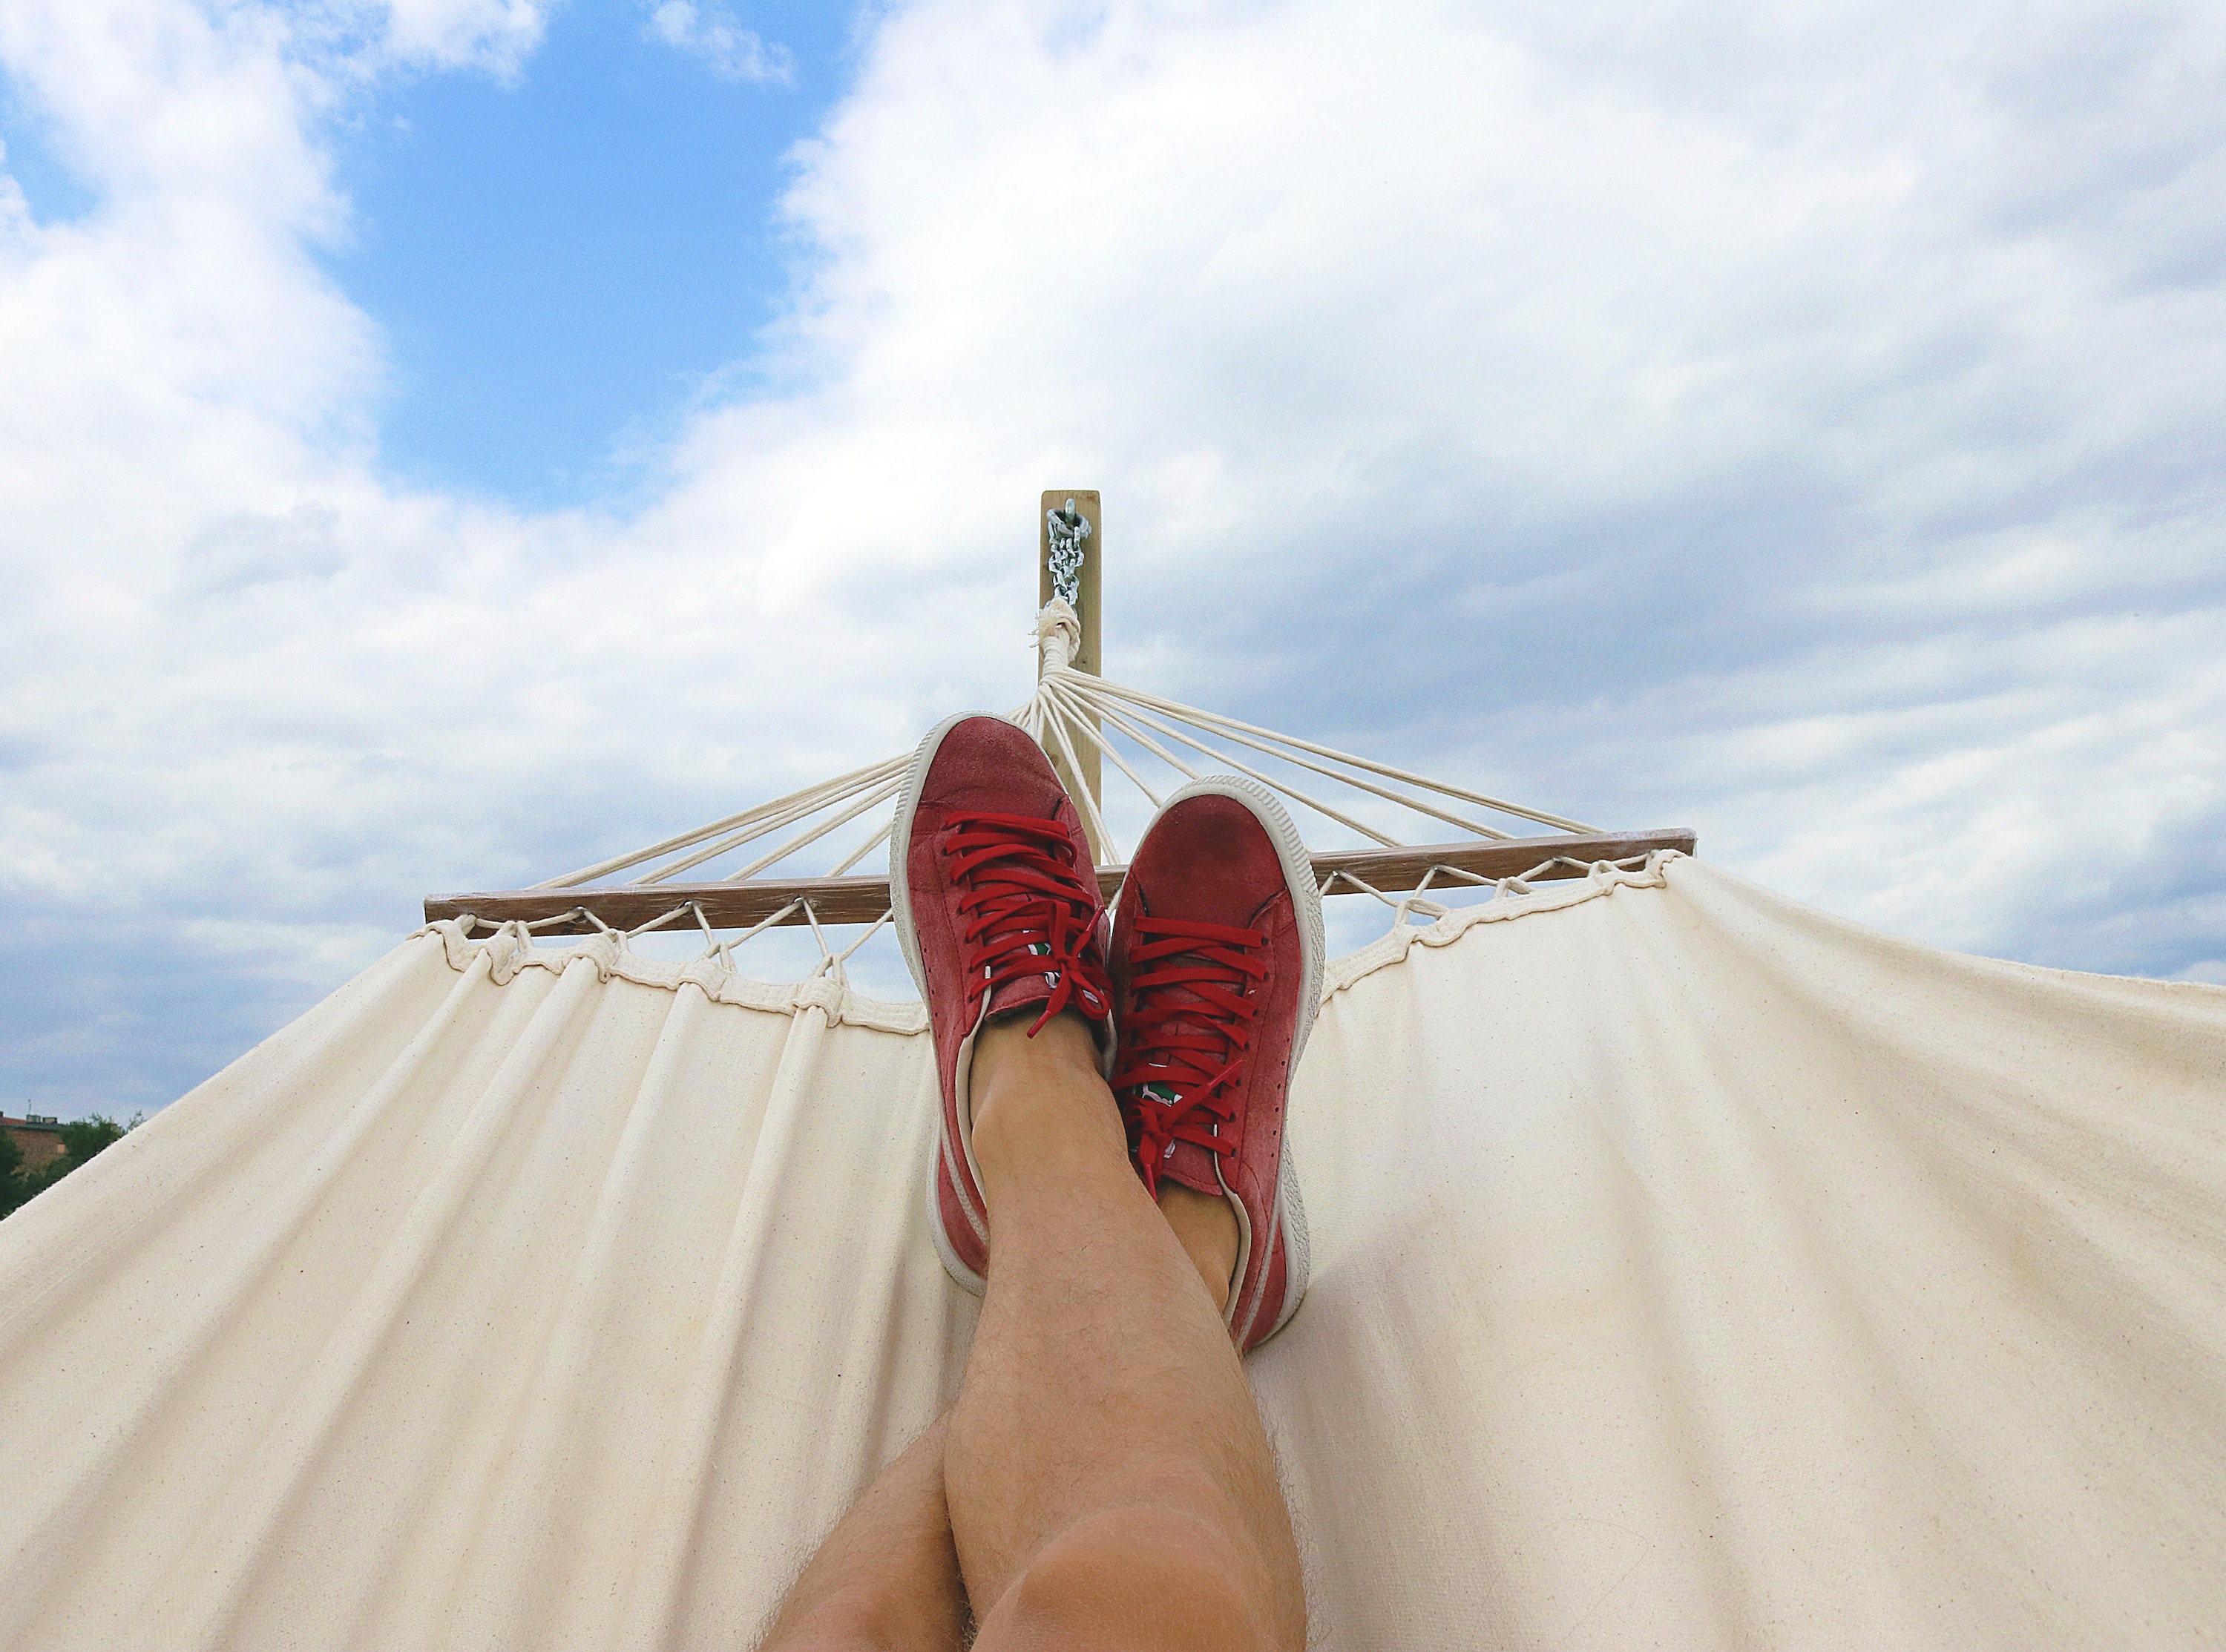 Man in hammock with red shoes looking up at clouds in blue sky